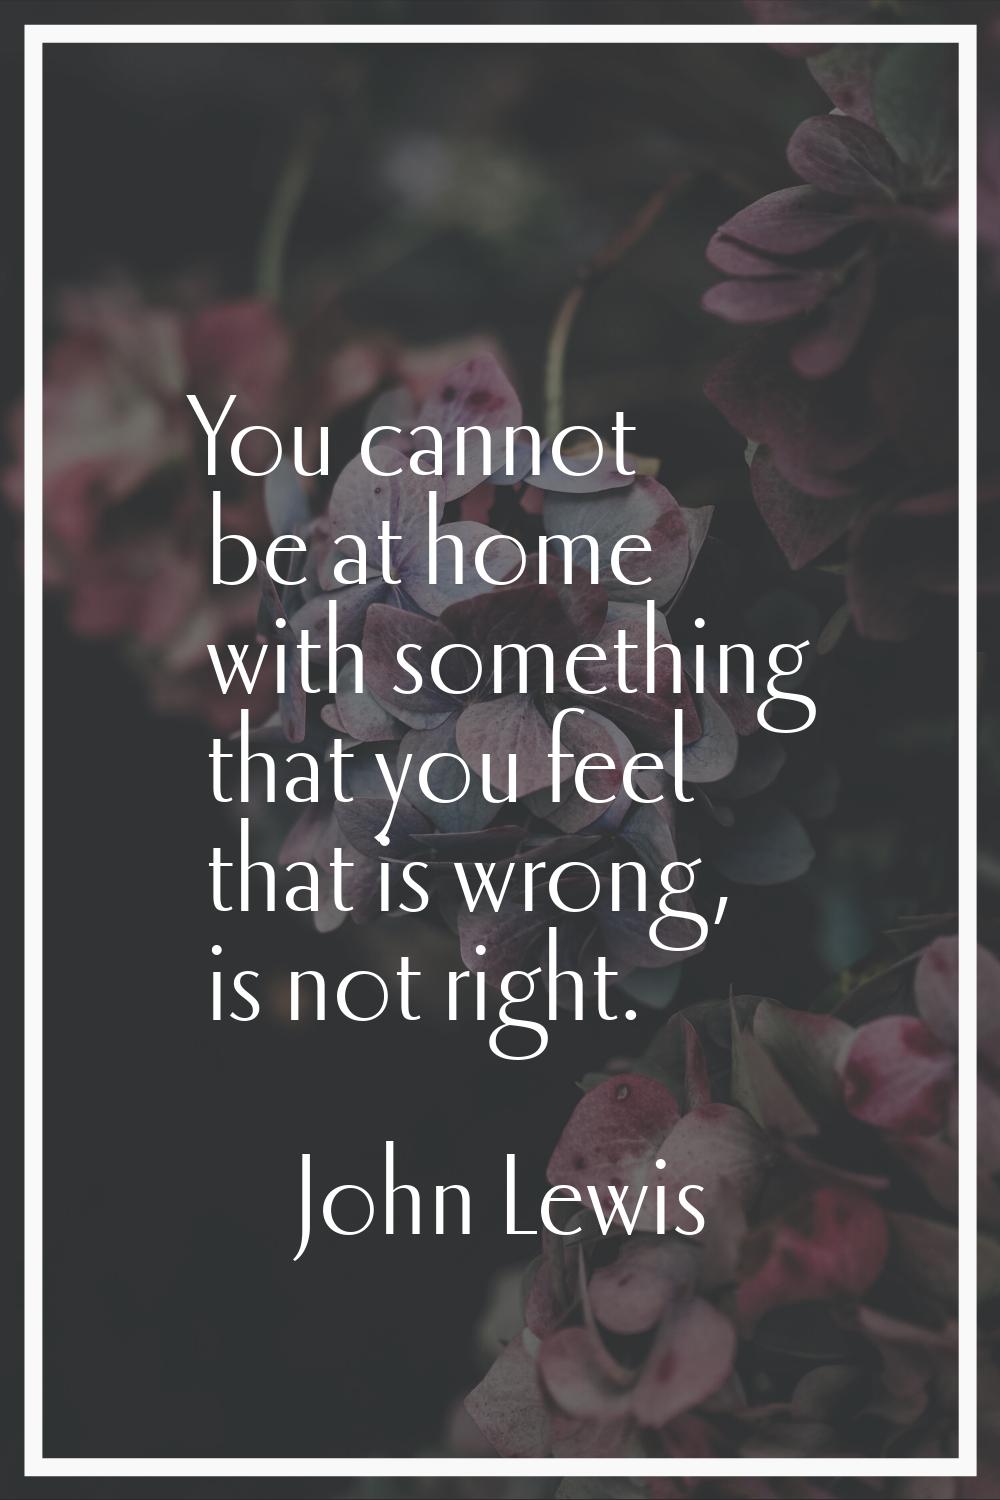 You cannot be at home with something that you feel that is wrong, is not right.